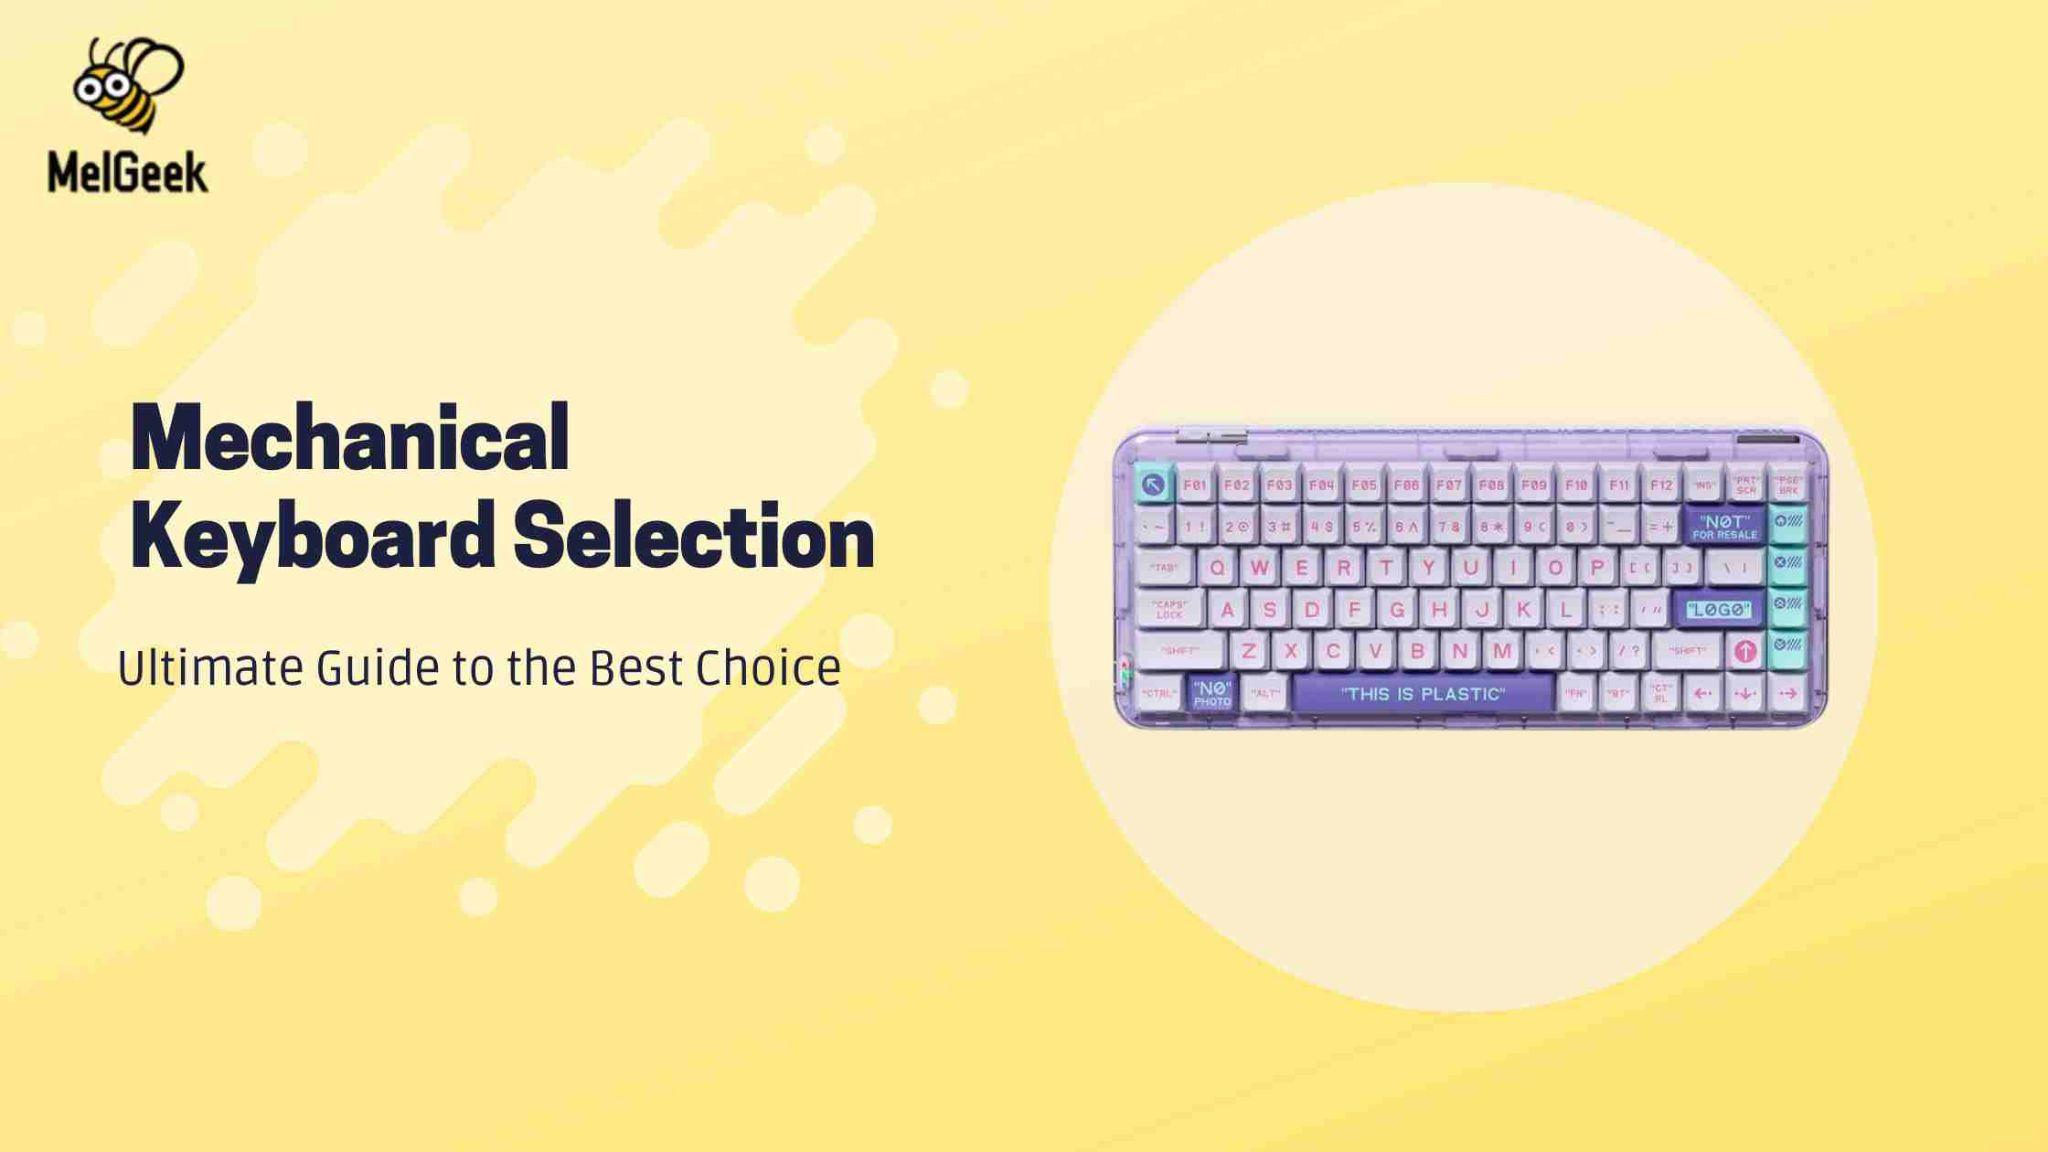 Mechanical Keyboard Selection: Ultimate Guide to the Best Choice